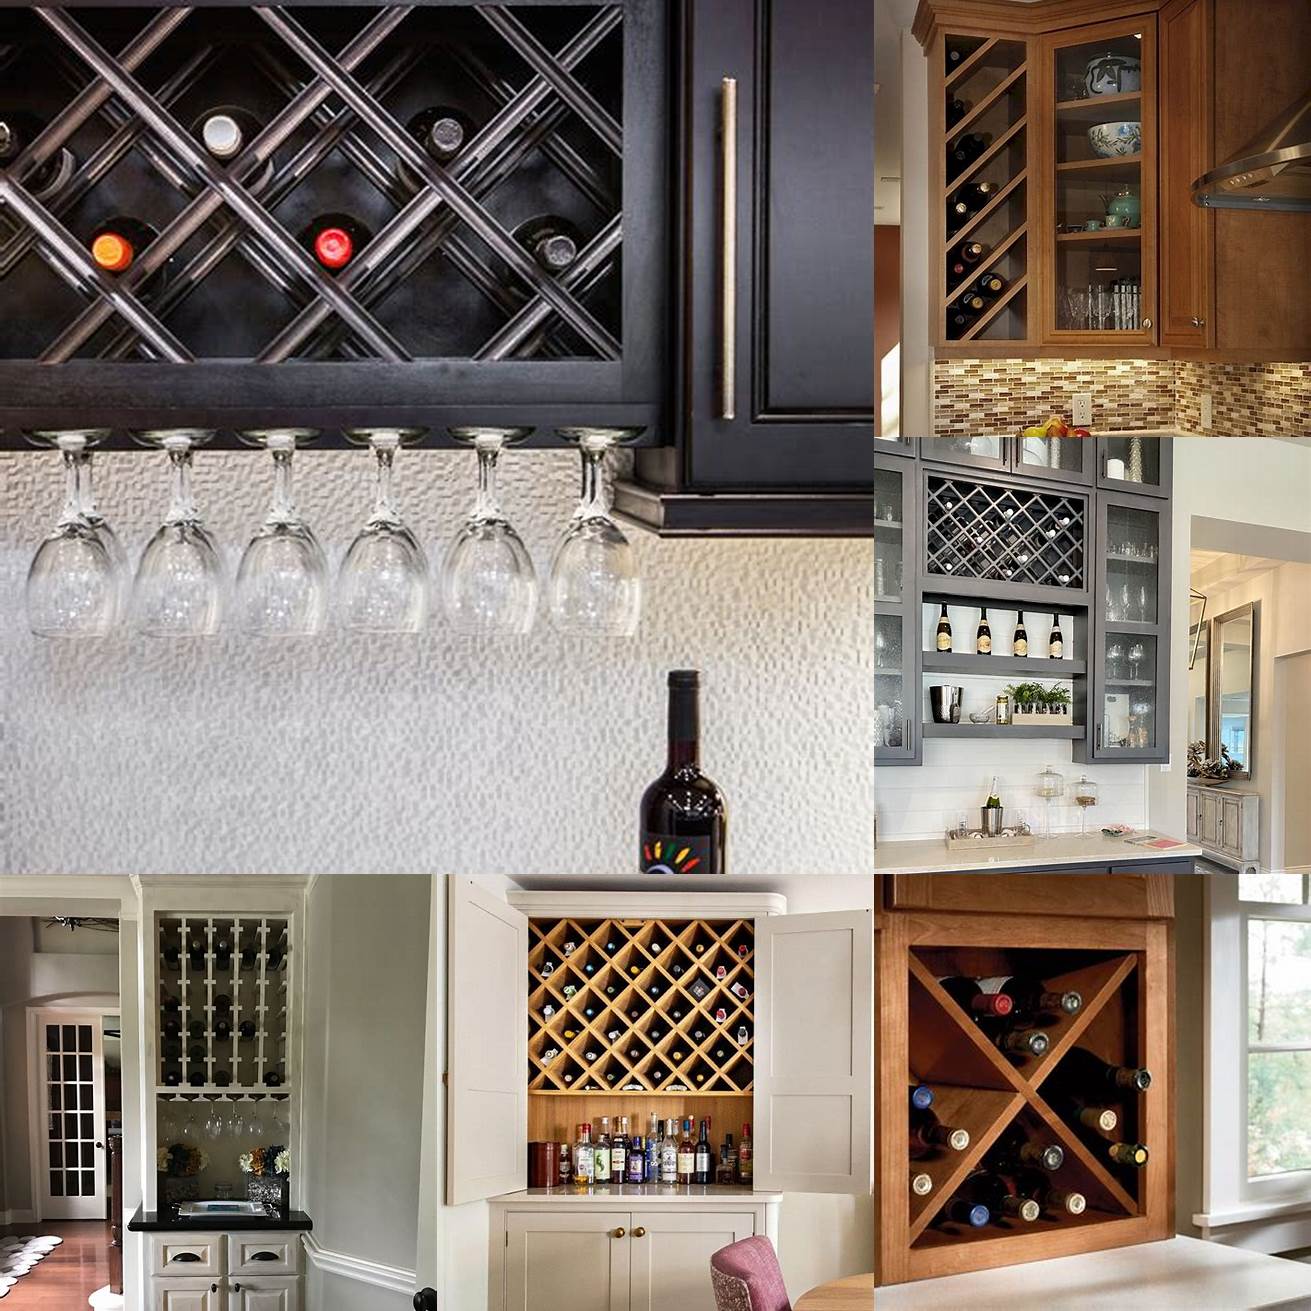 A Sears kitchen cabinet with a built-in wine rack is perfect for wine enthusiasts